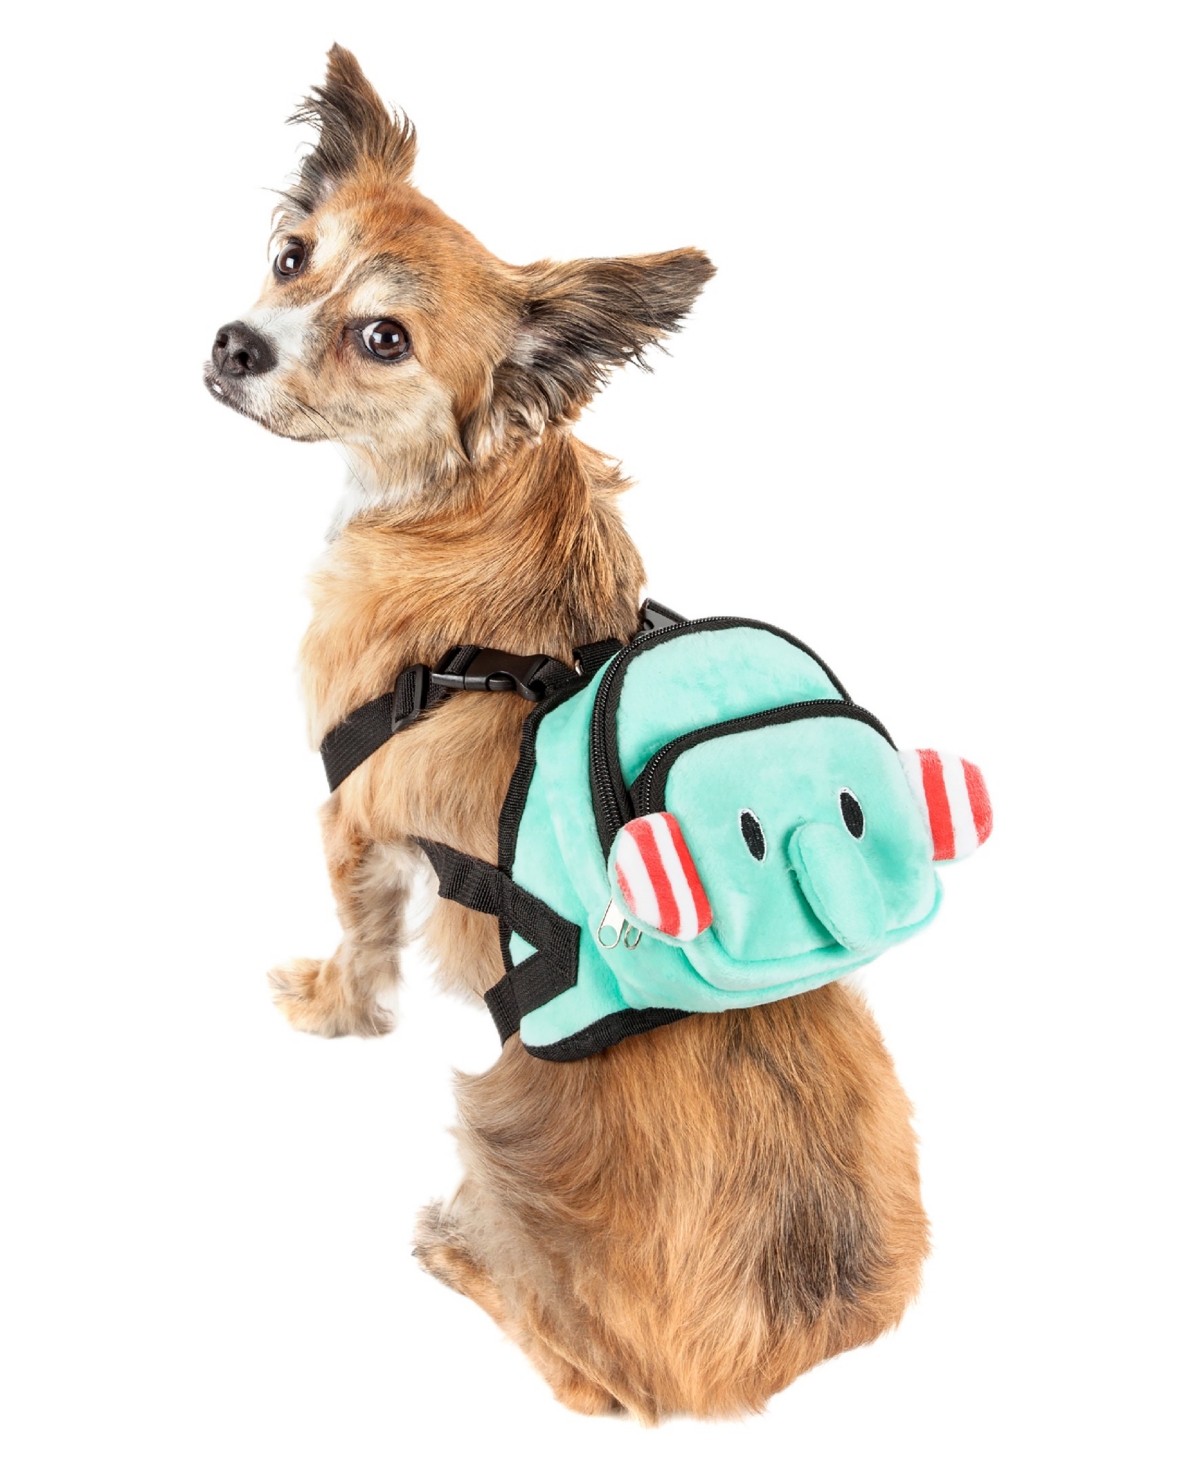 'Dumbone' Dual-Pocketed Compartmental Animated Dog Harness Backpack - Blue